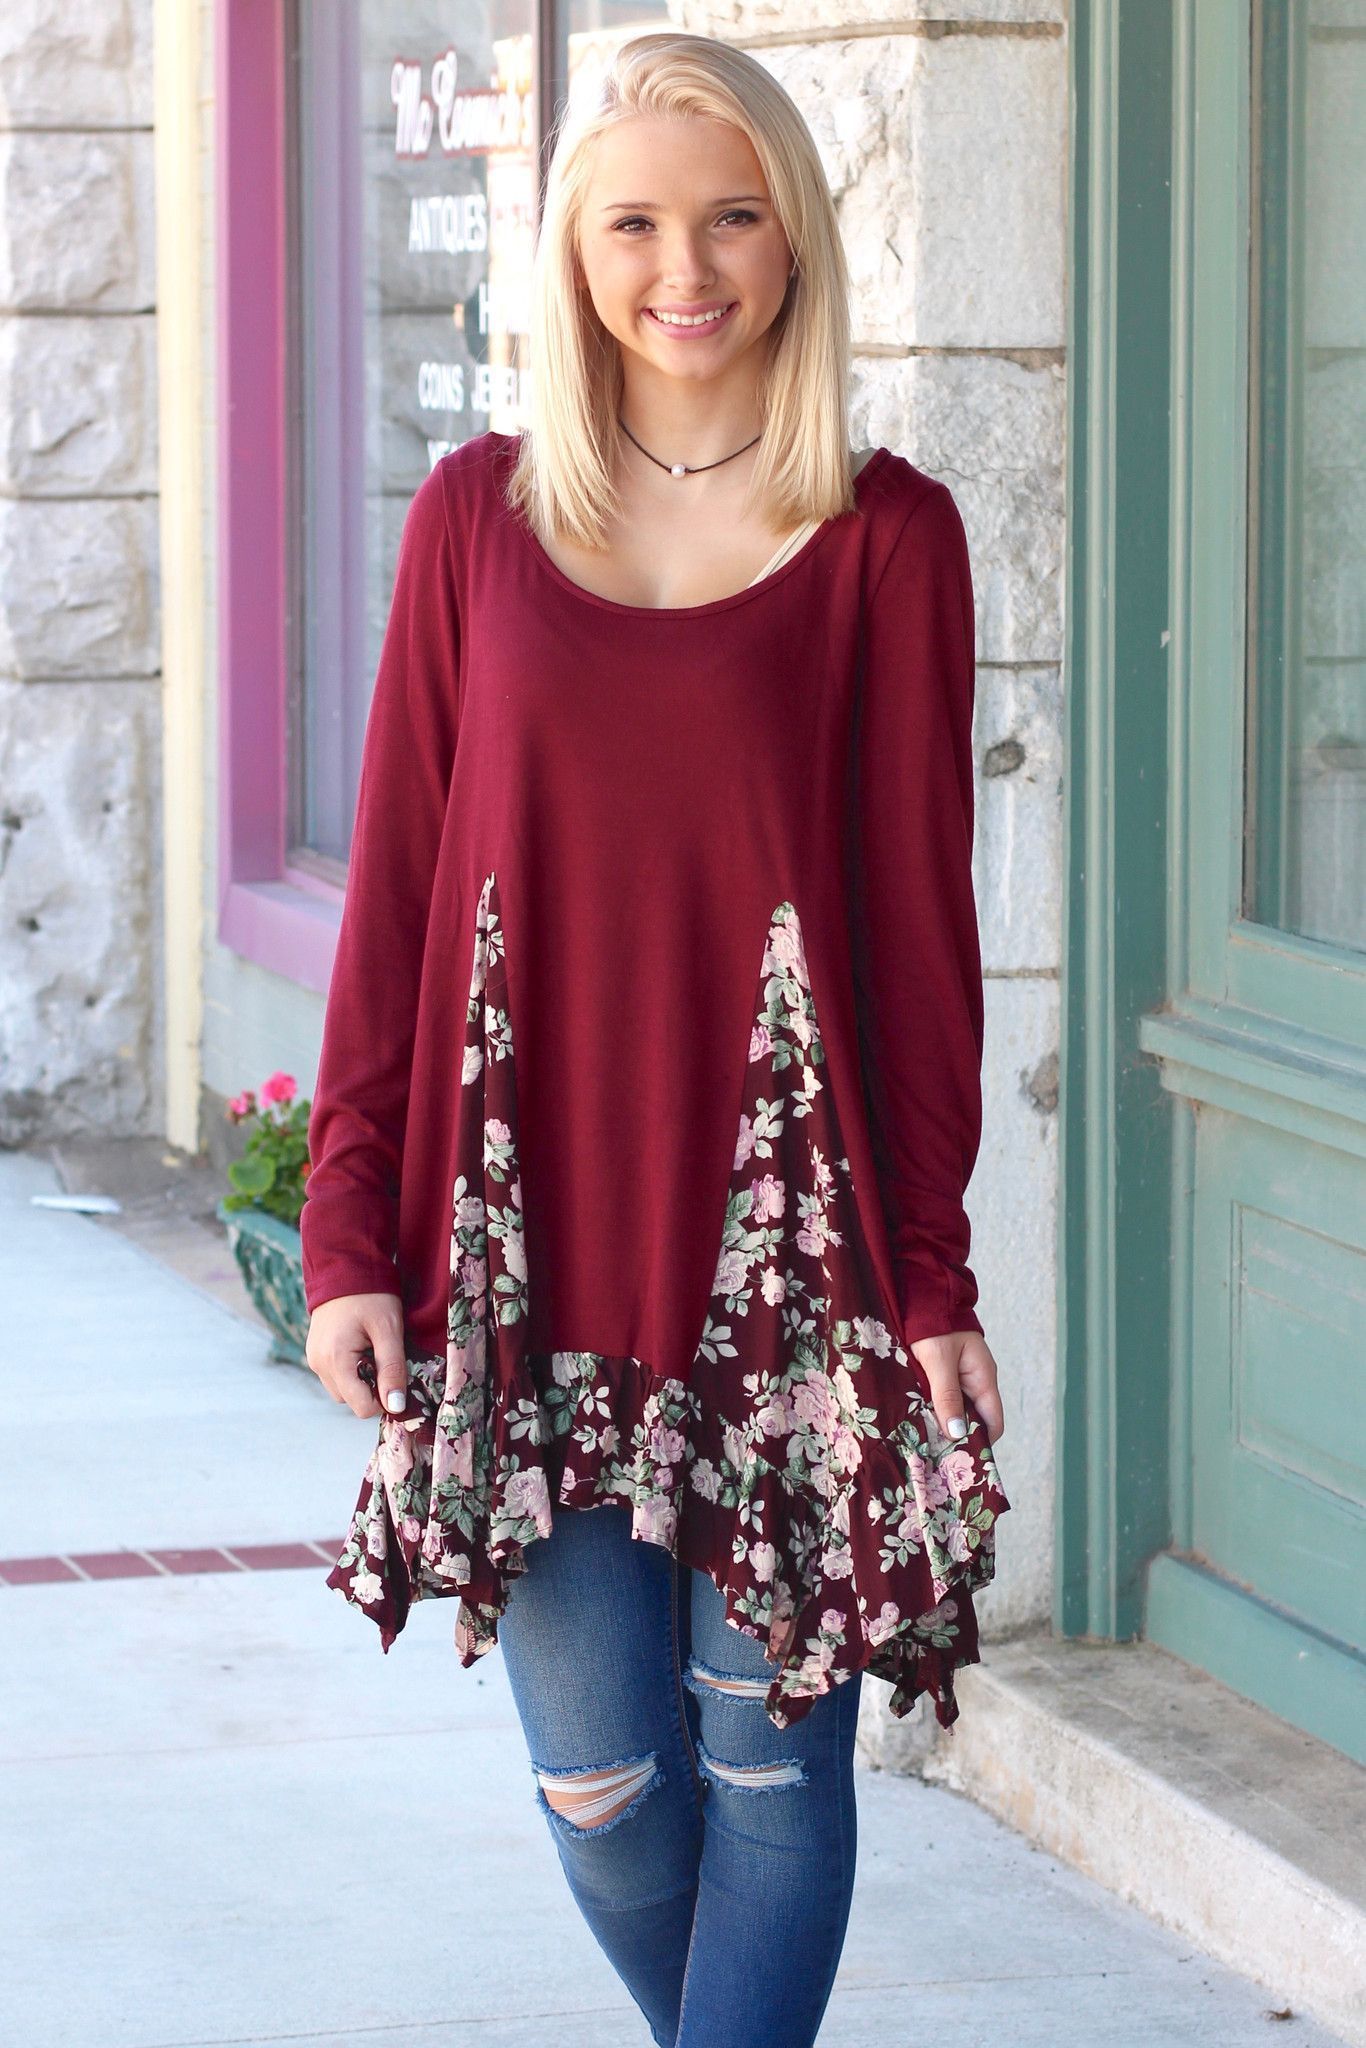 Long sleeve knit tunic top with a rose floral print spliced out of it and ruffled trim!